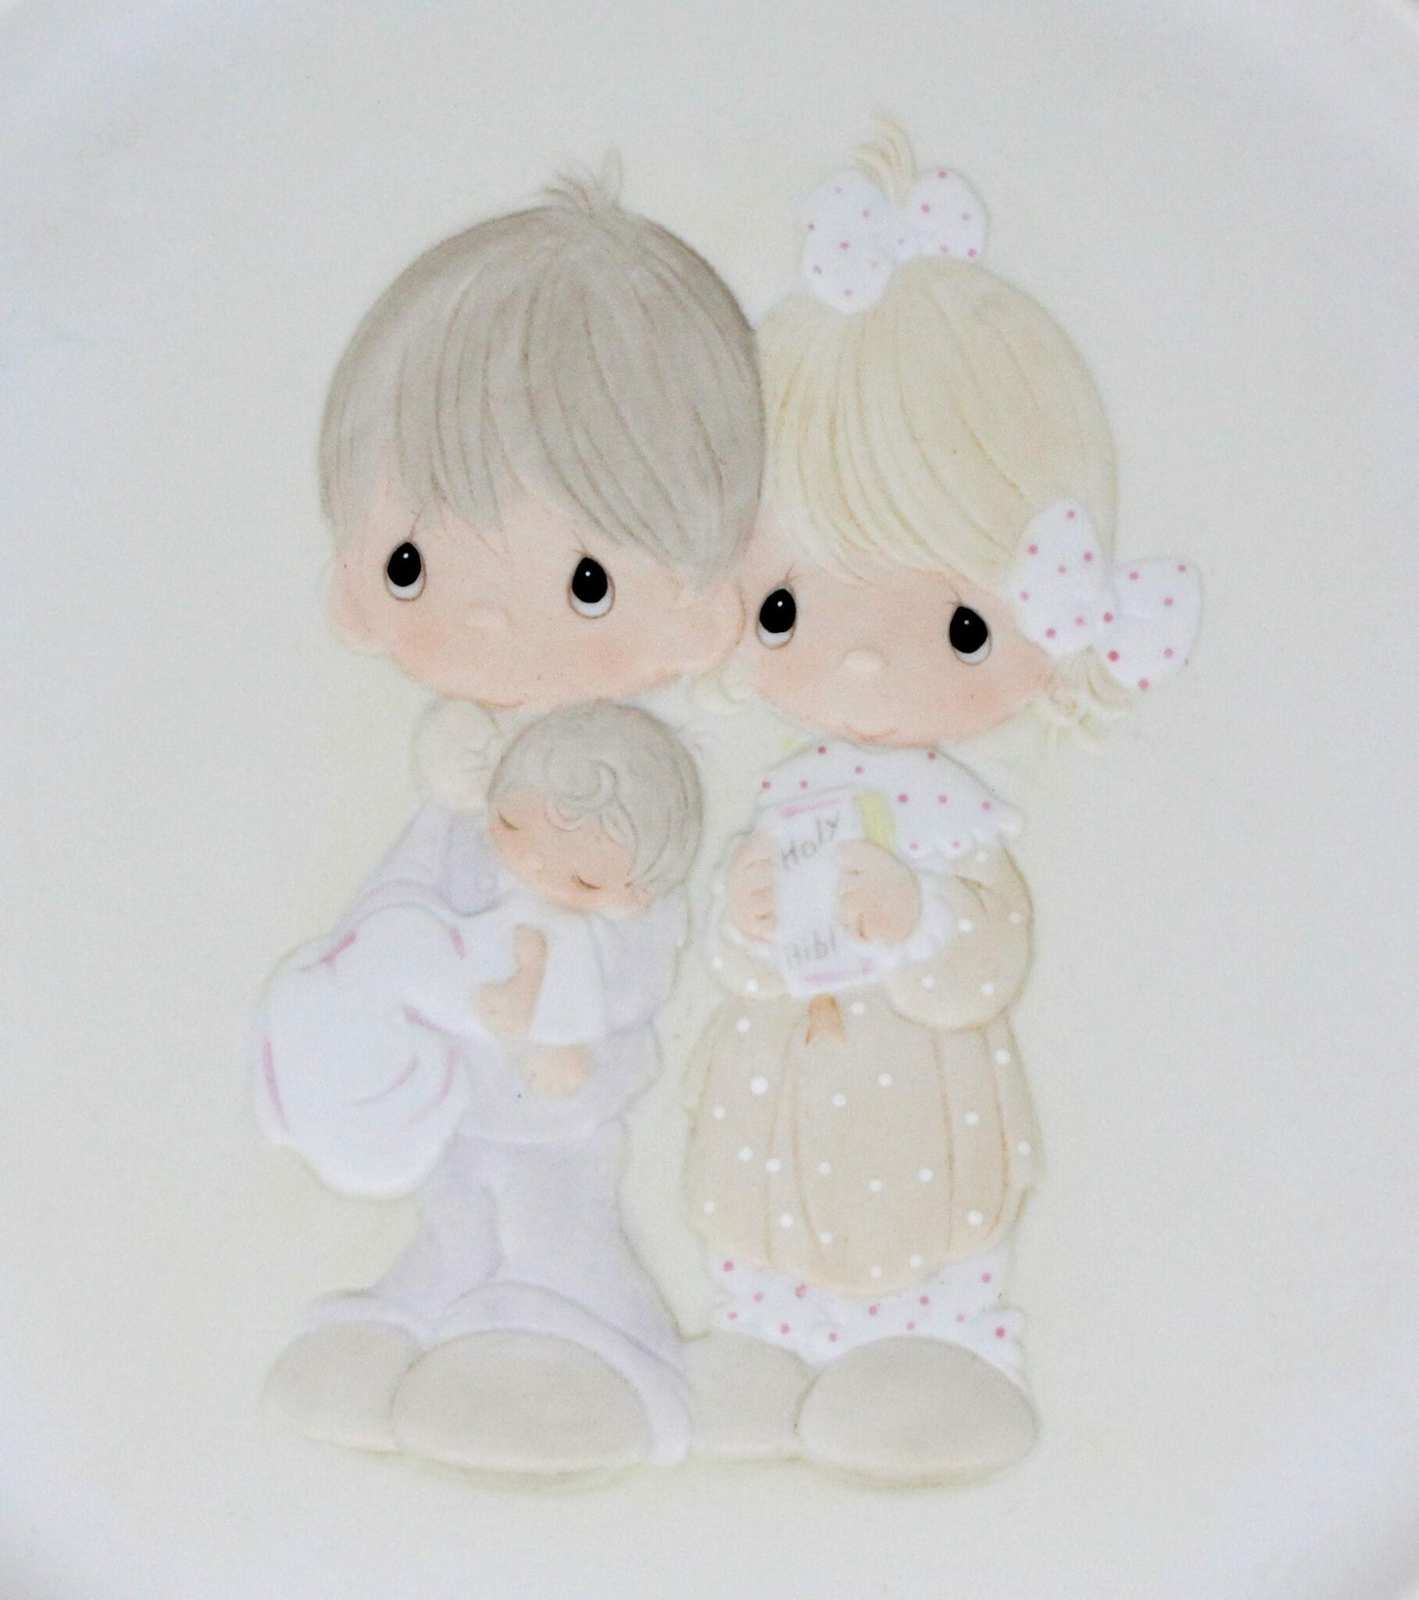 Decorative Plate, Enesco, Precious Moments, Rejoicing With You, Vintage 1981, SOLD